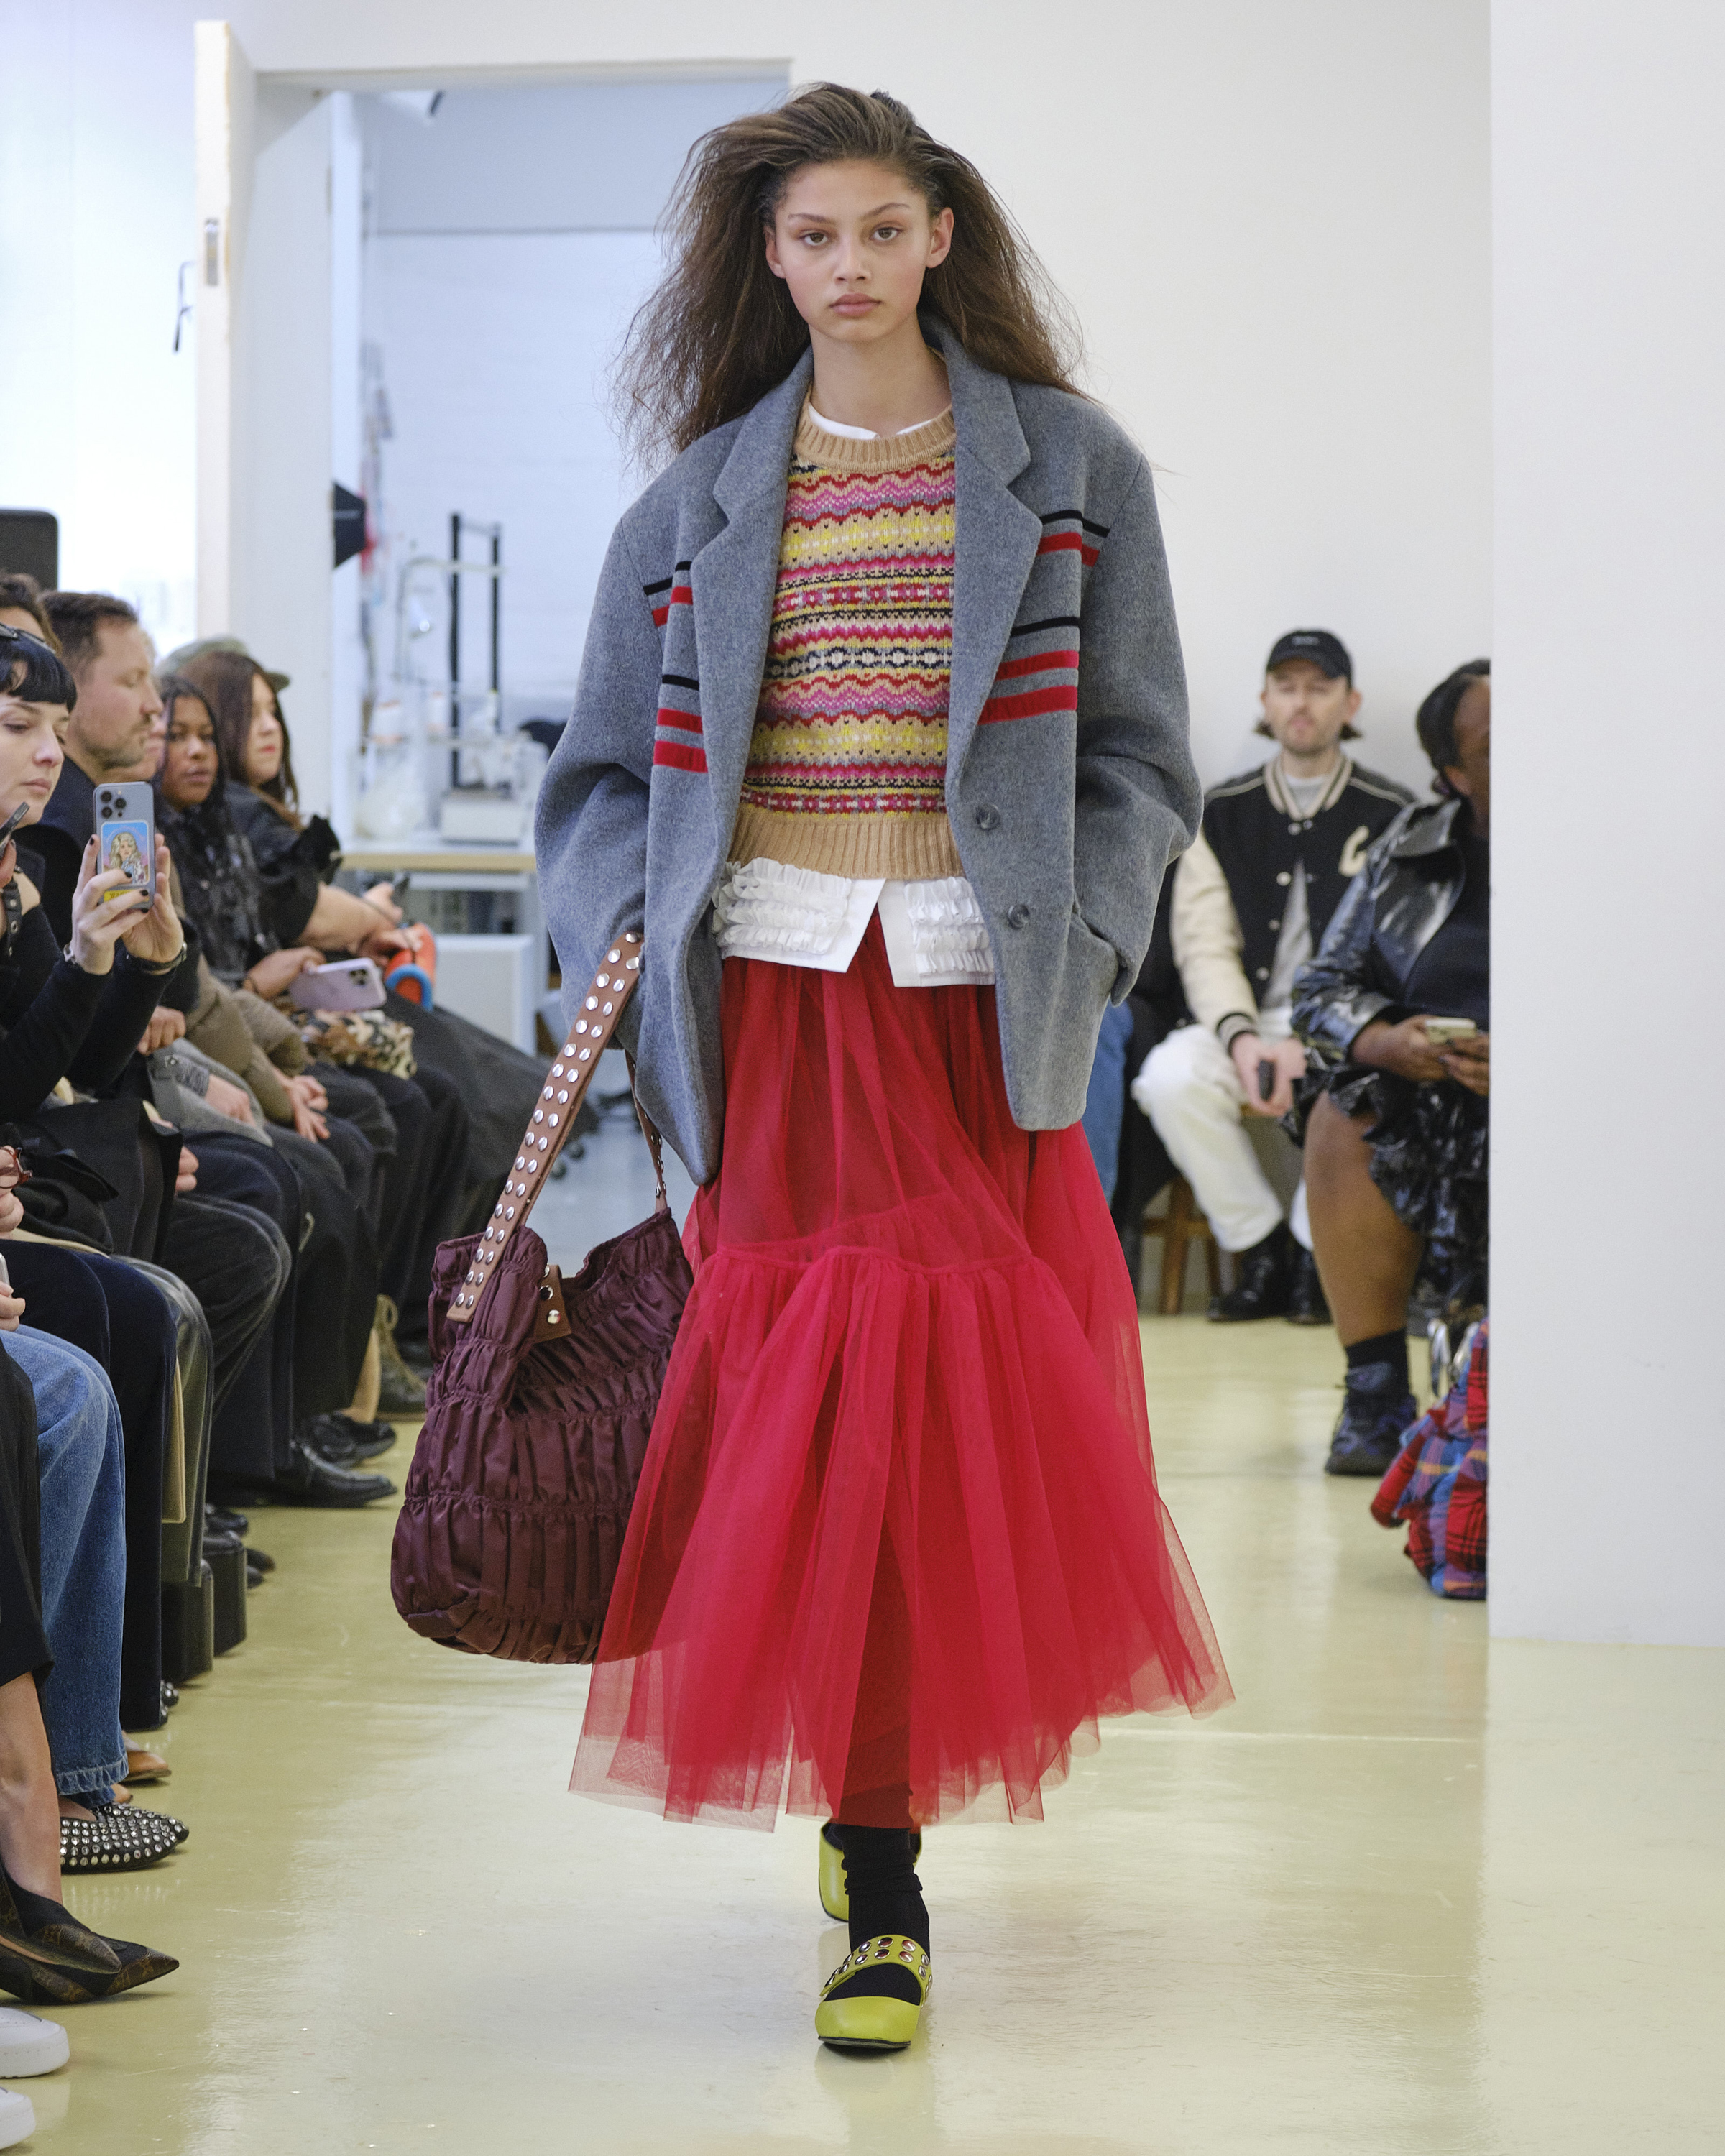 A model on the Molly Goddard runway at AW23 London Fashion Week, wearing a long red tulle skirt with a patterned woollen jumper and grey jacket, carrying an oversized slouchy bag